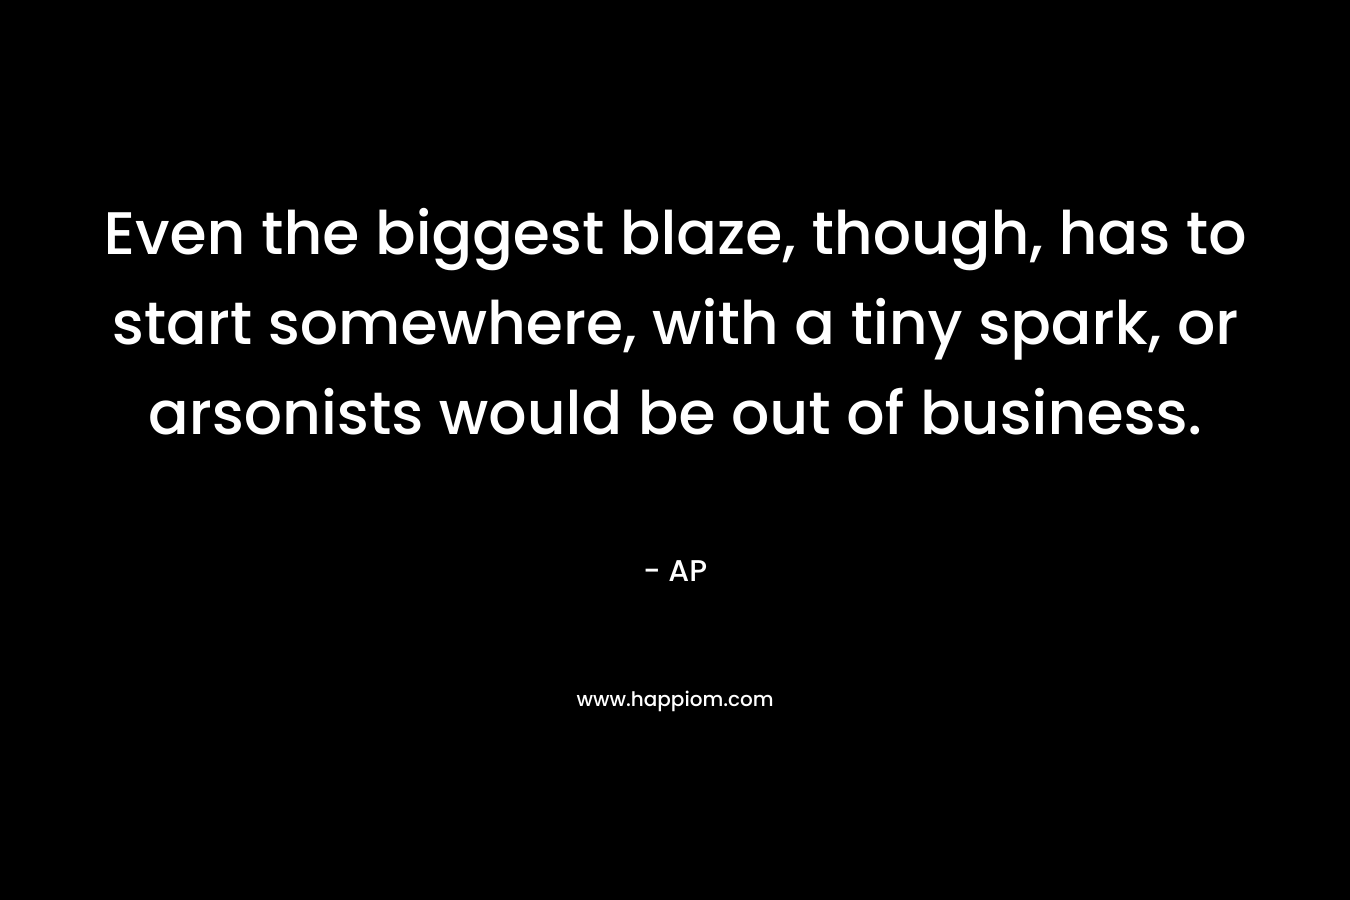 Even the biggest blaze, though, has to start somewhere, with a tiny spark, or arsonists would be out of business. – AP